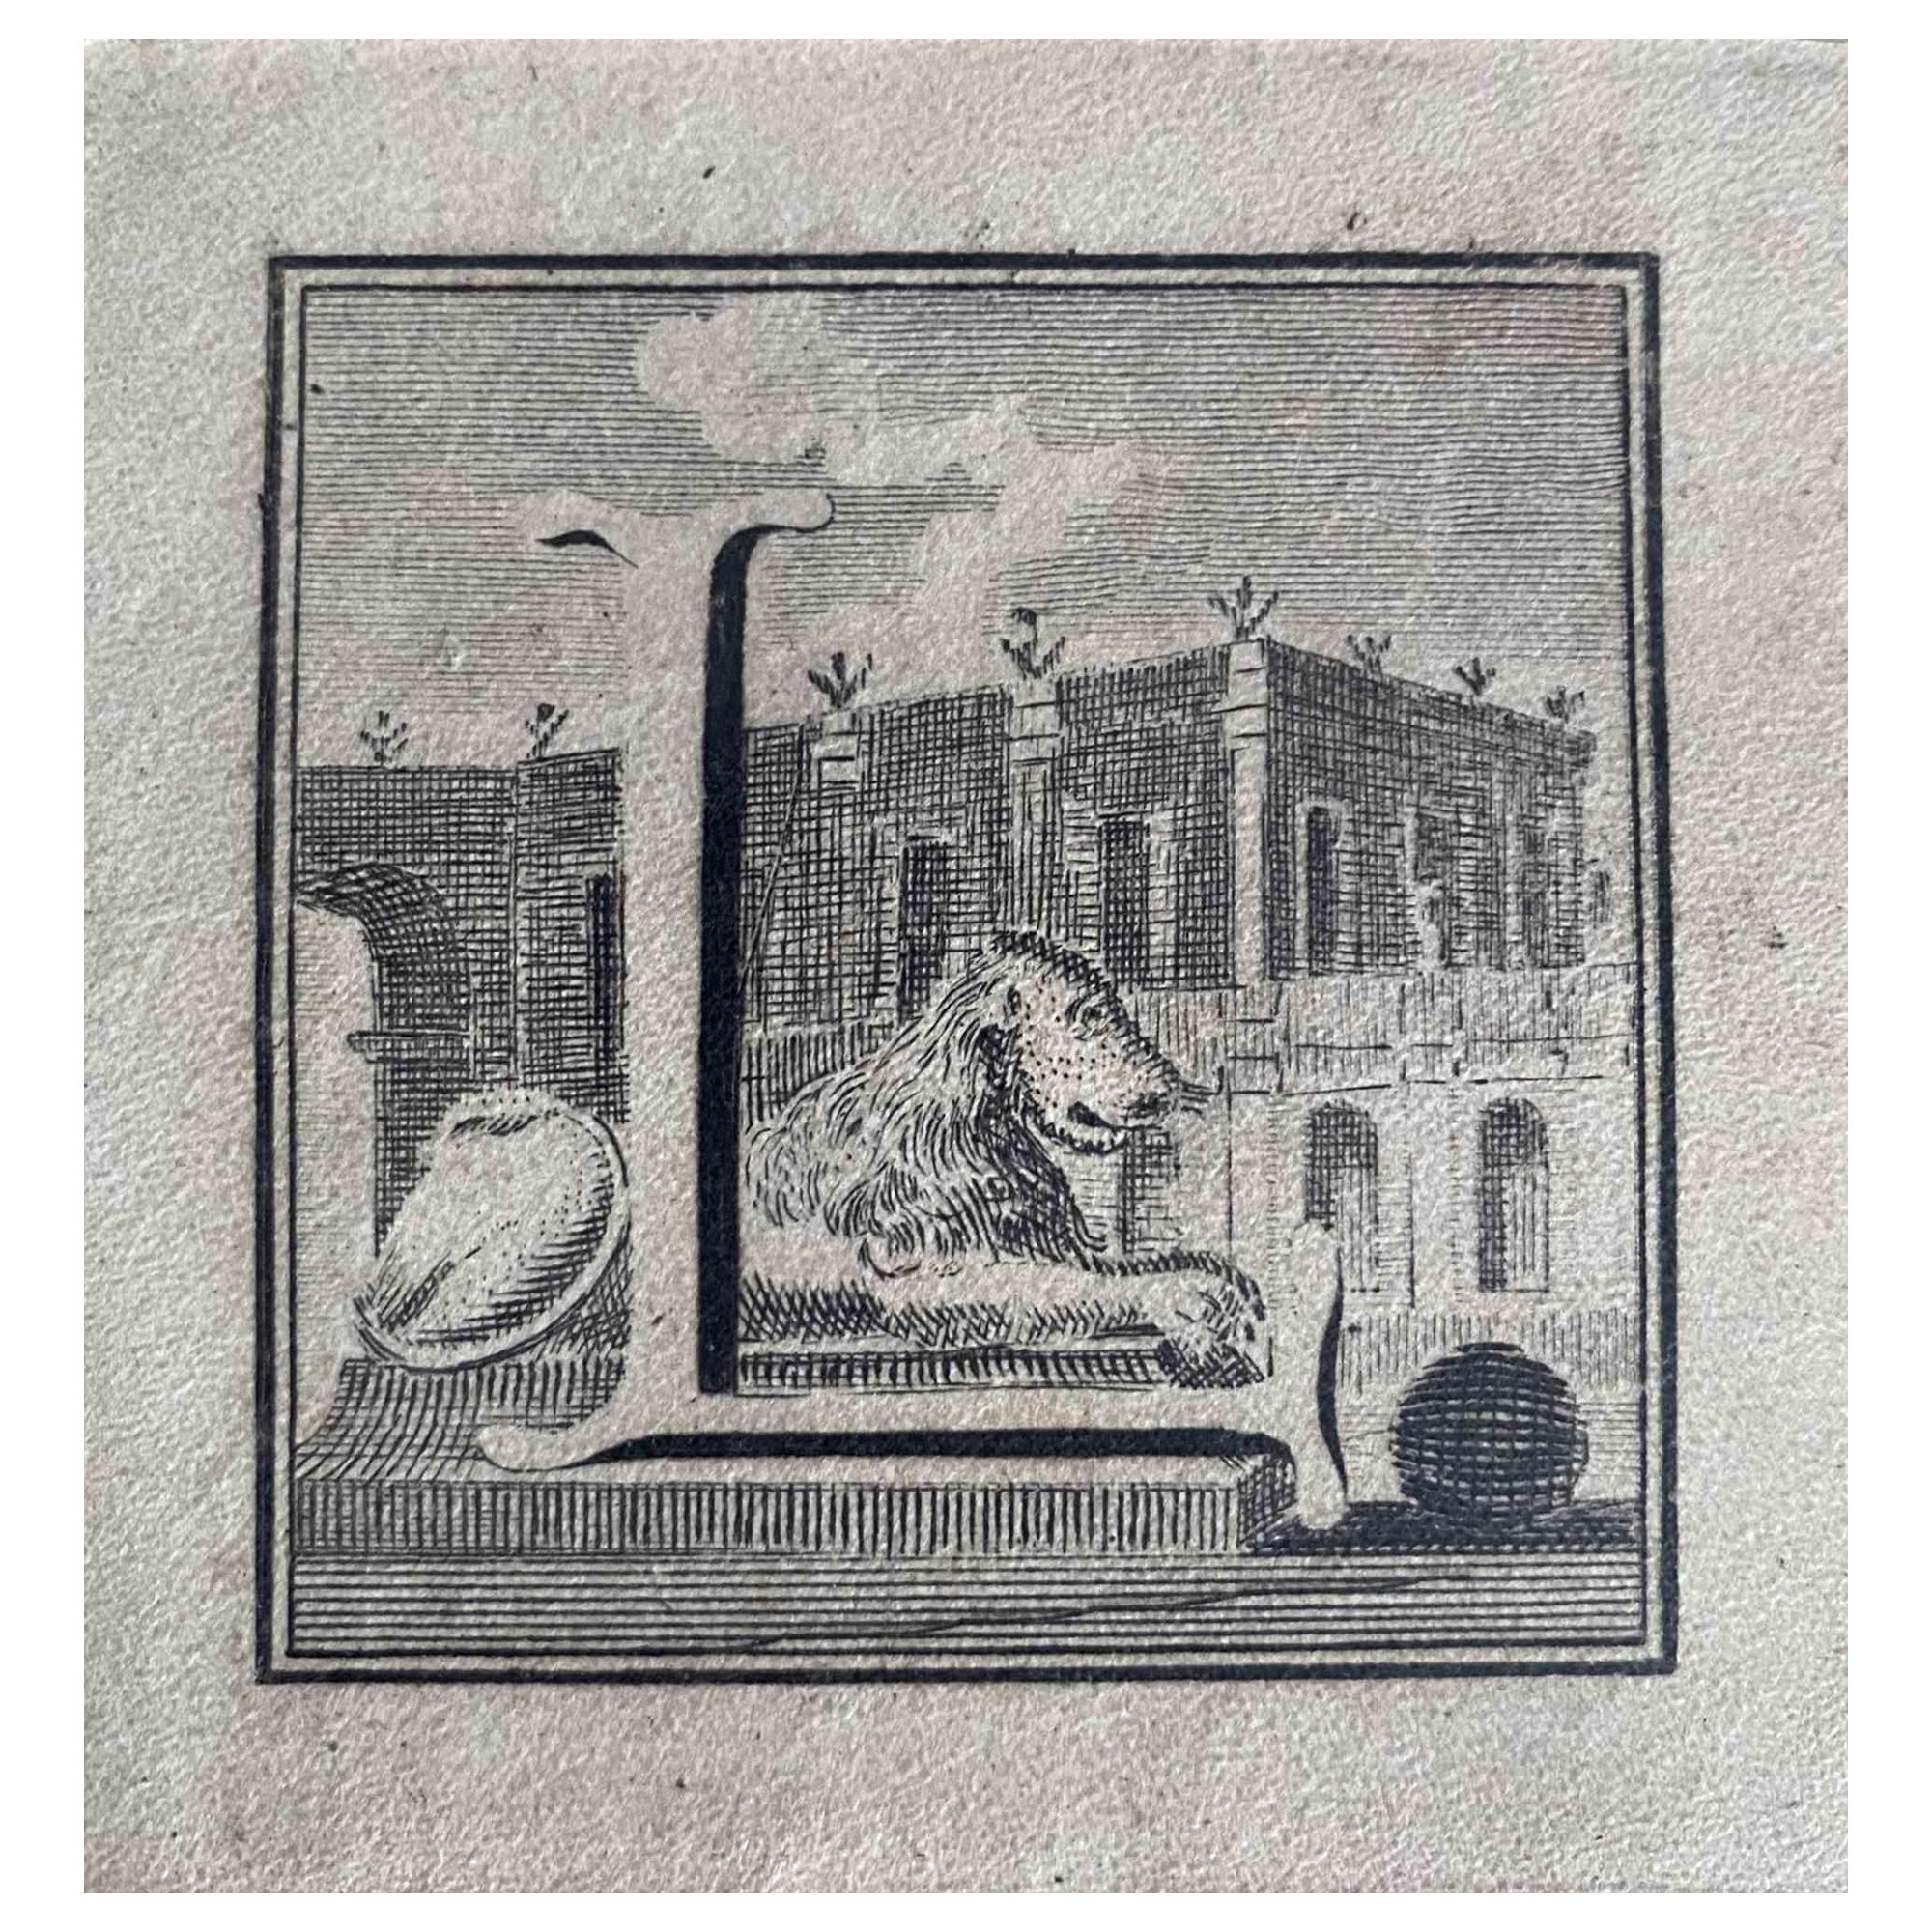 Unknown Figurative Print - Antiquities of Herculaneum -  Letter L - Etching  - 18th Century